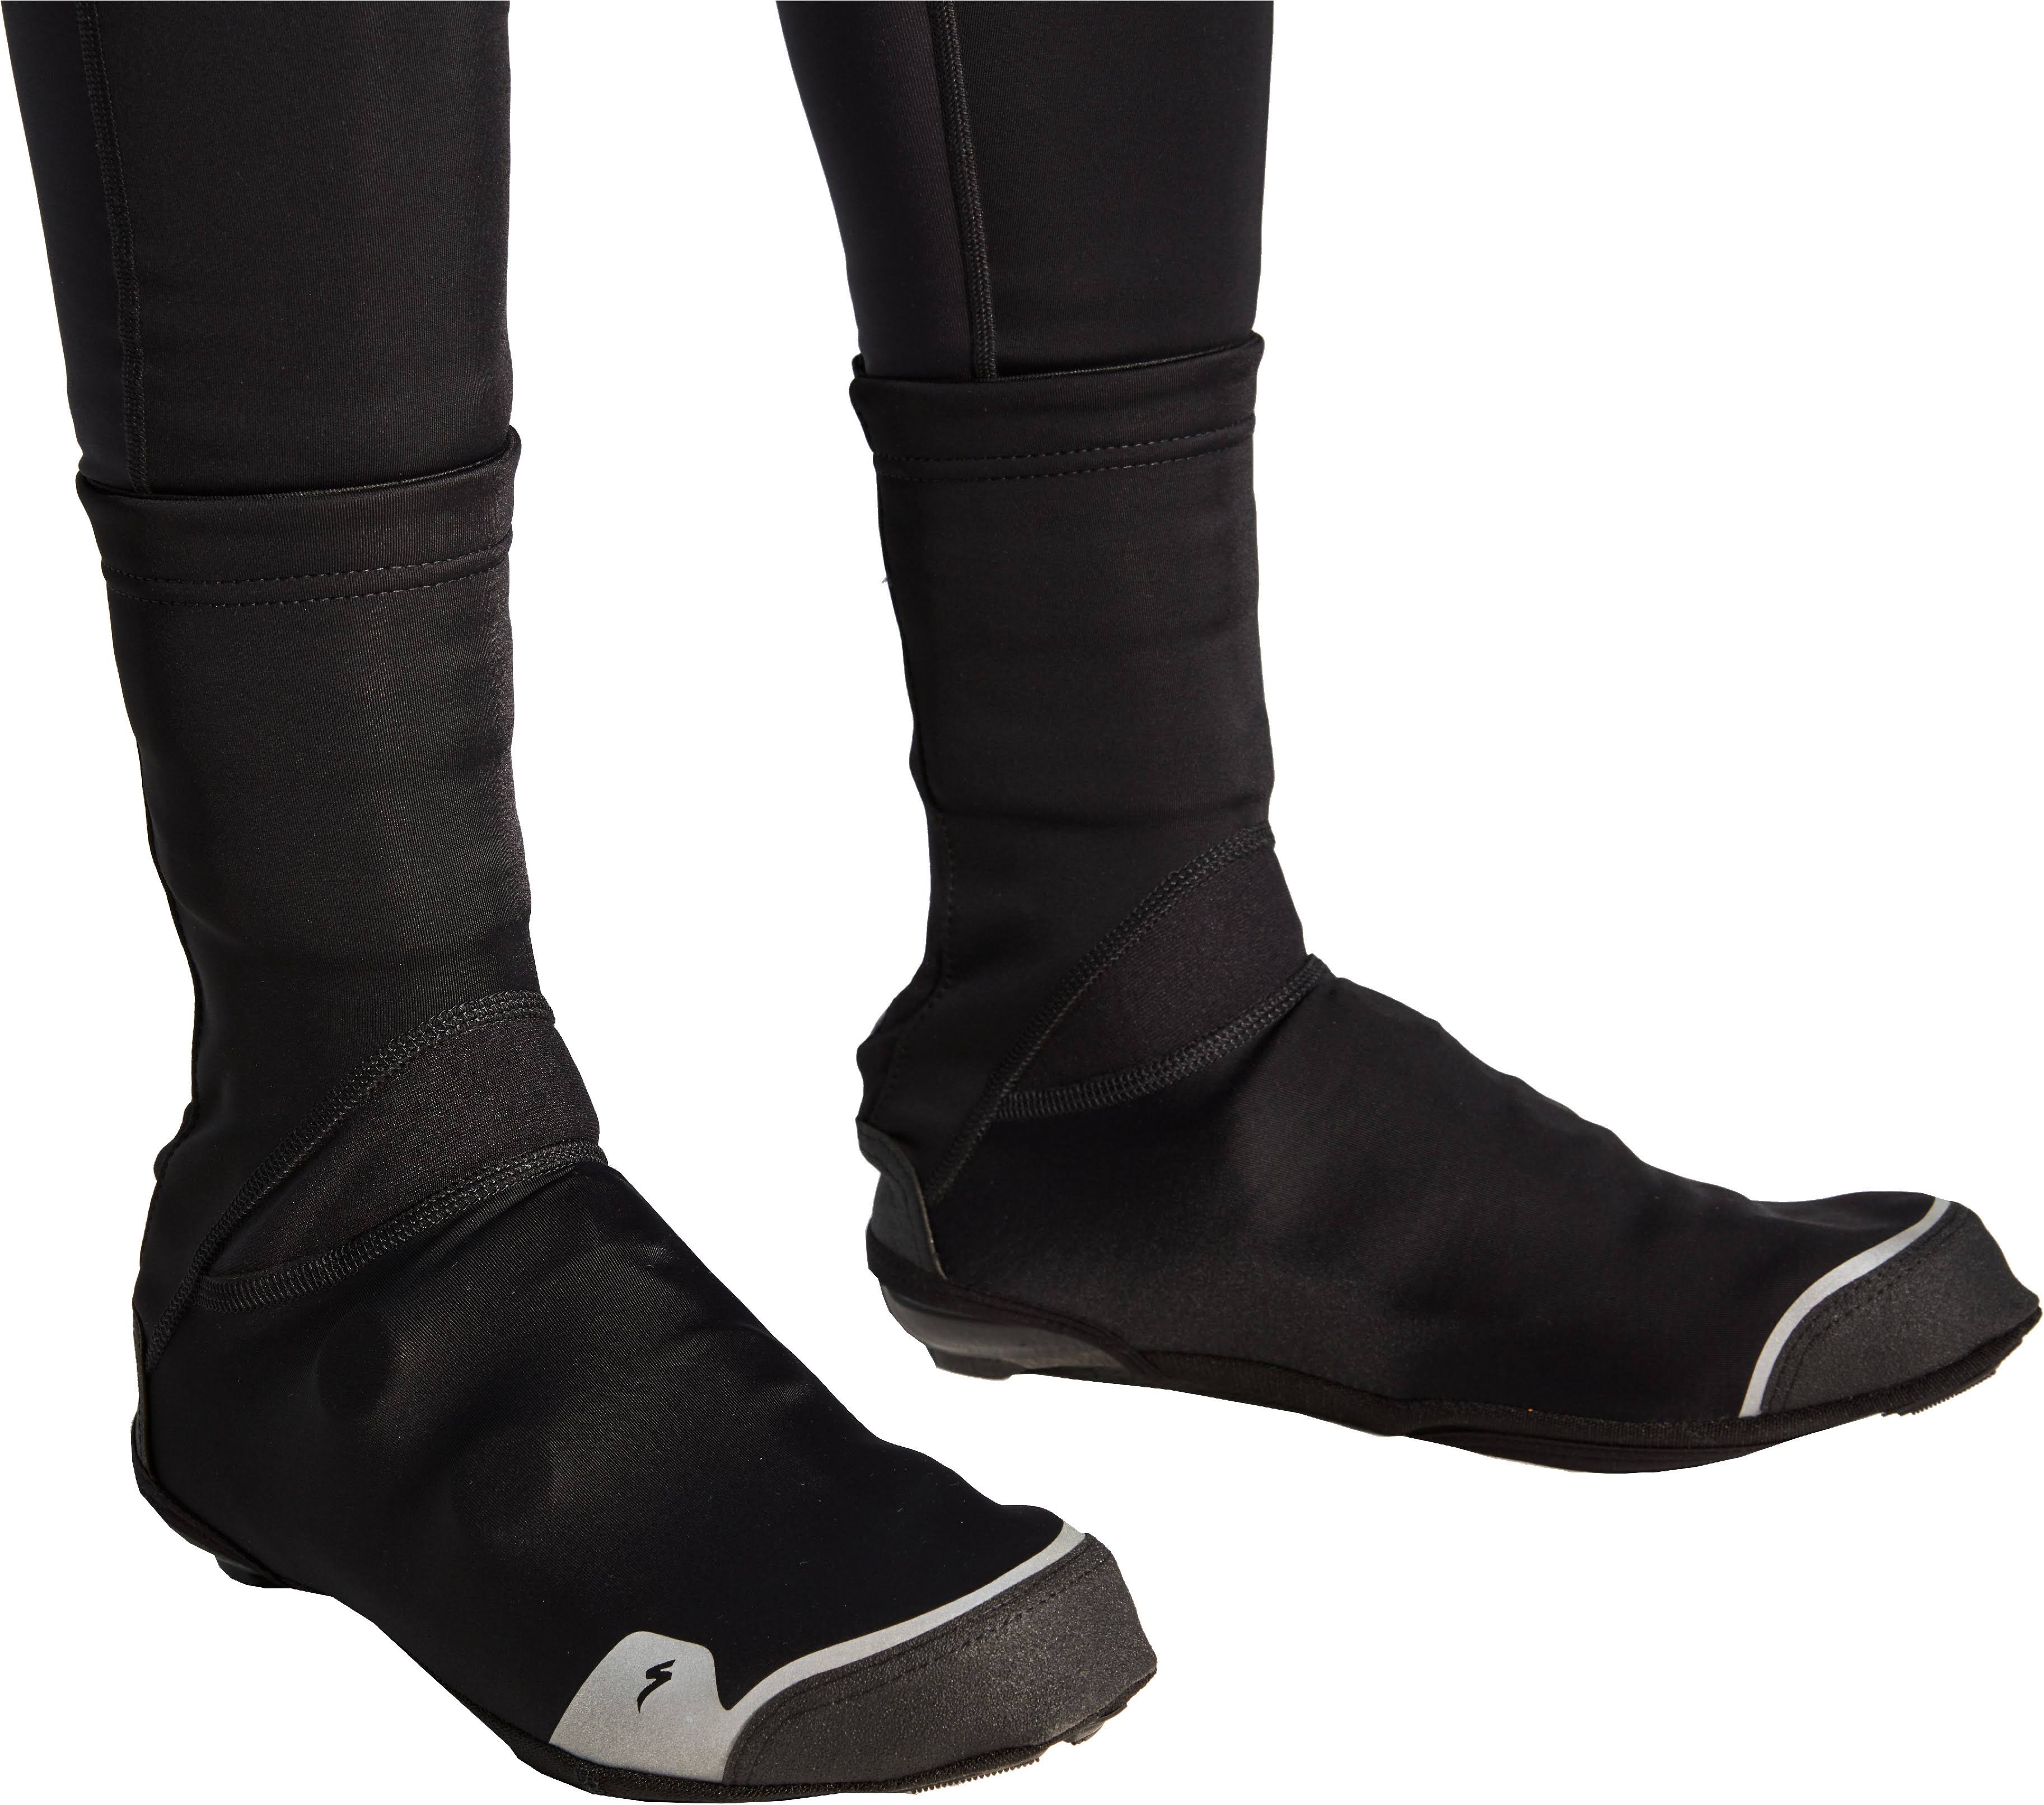 Specialized Element Shoe Covers - 43-44 - Black